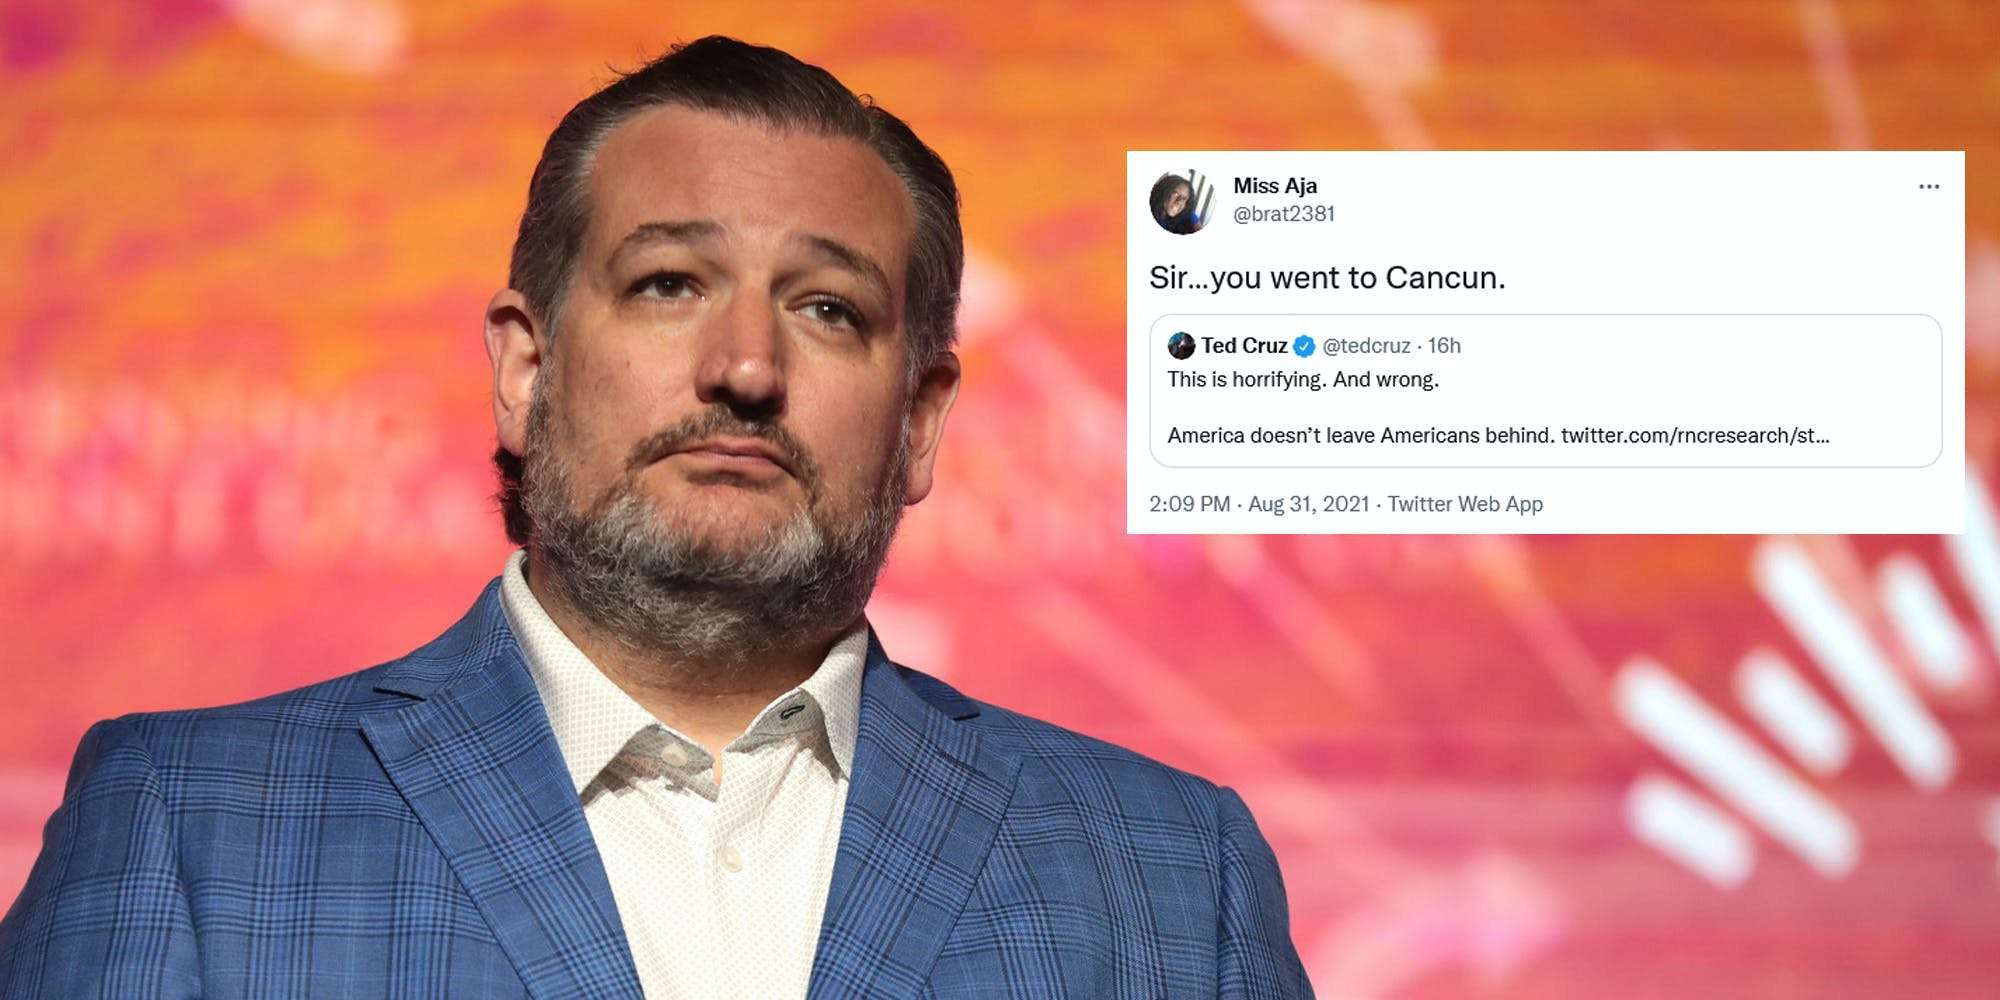 image for ‘You went to Cancun’: Ted Cruz mocked for tweeting ‘America doesn’t leave Americans behind’